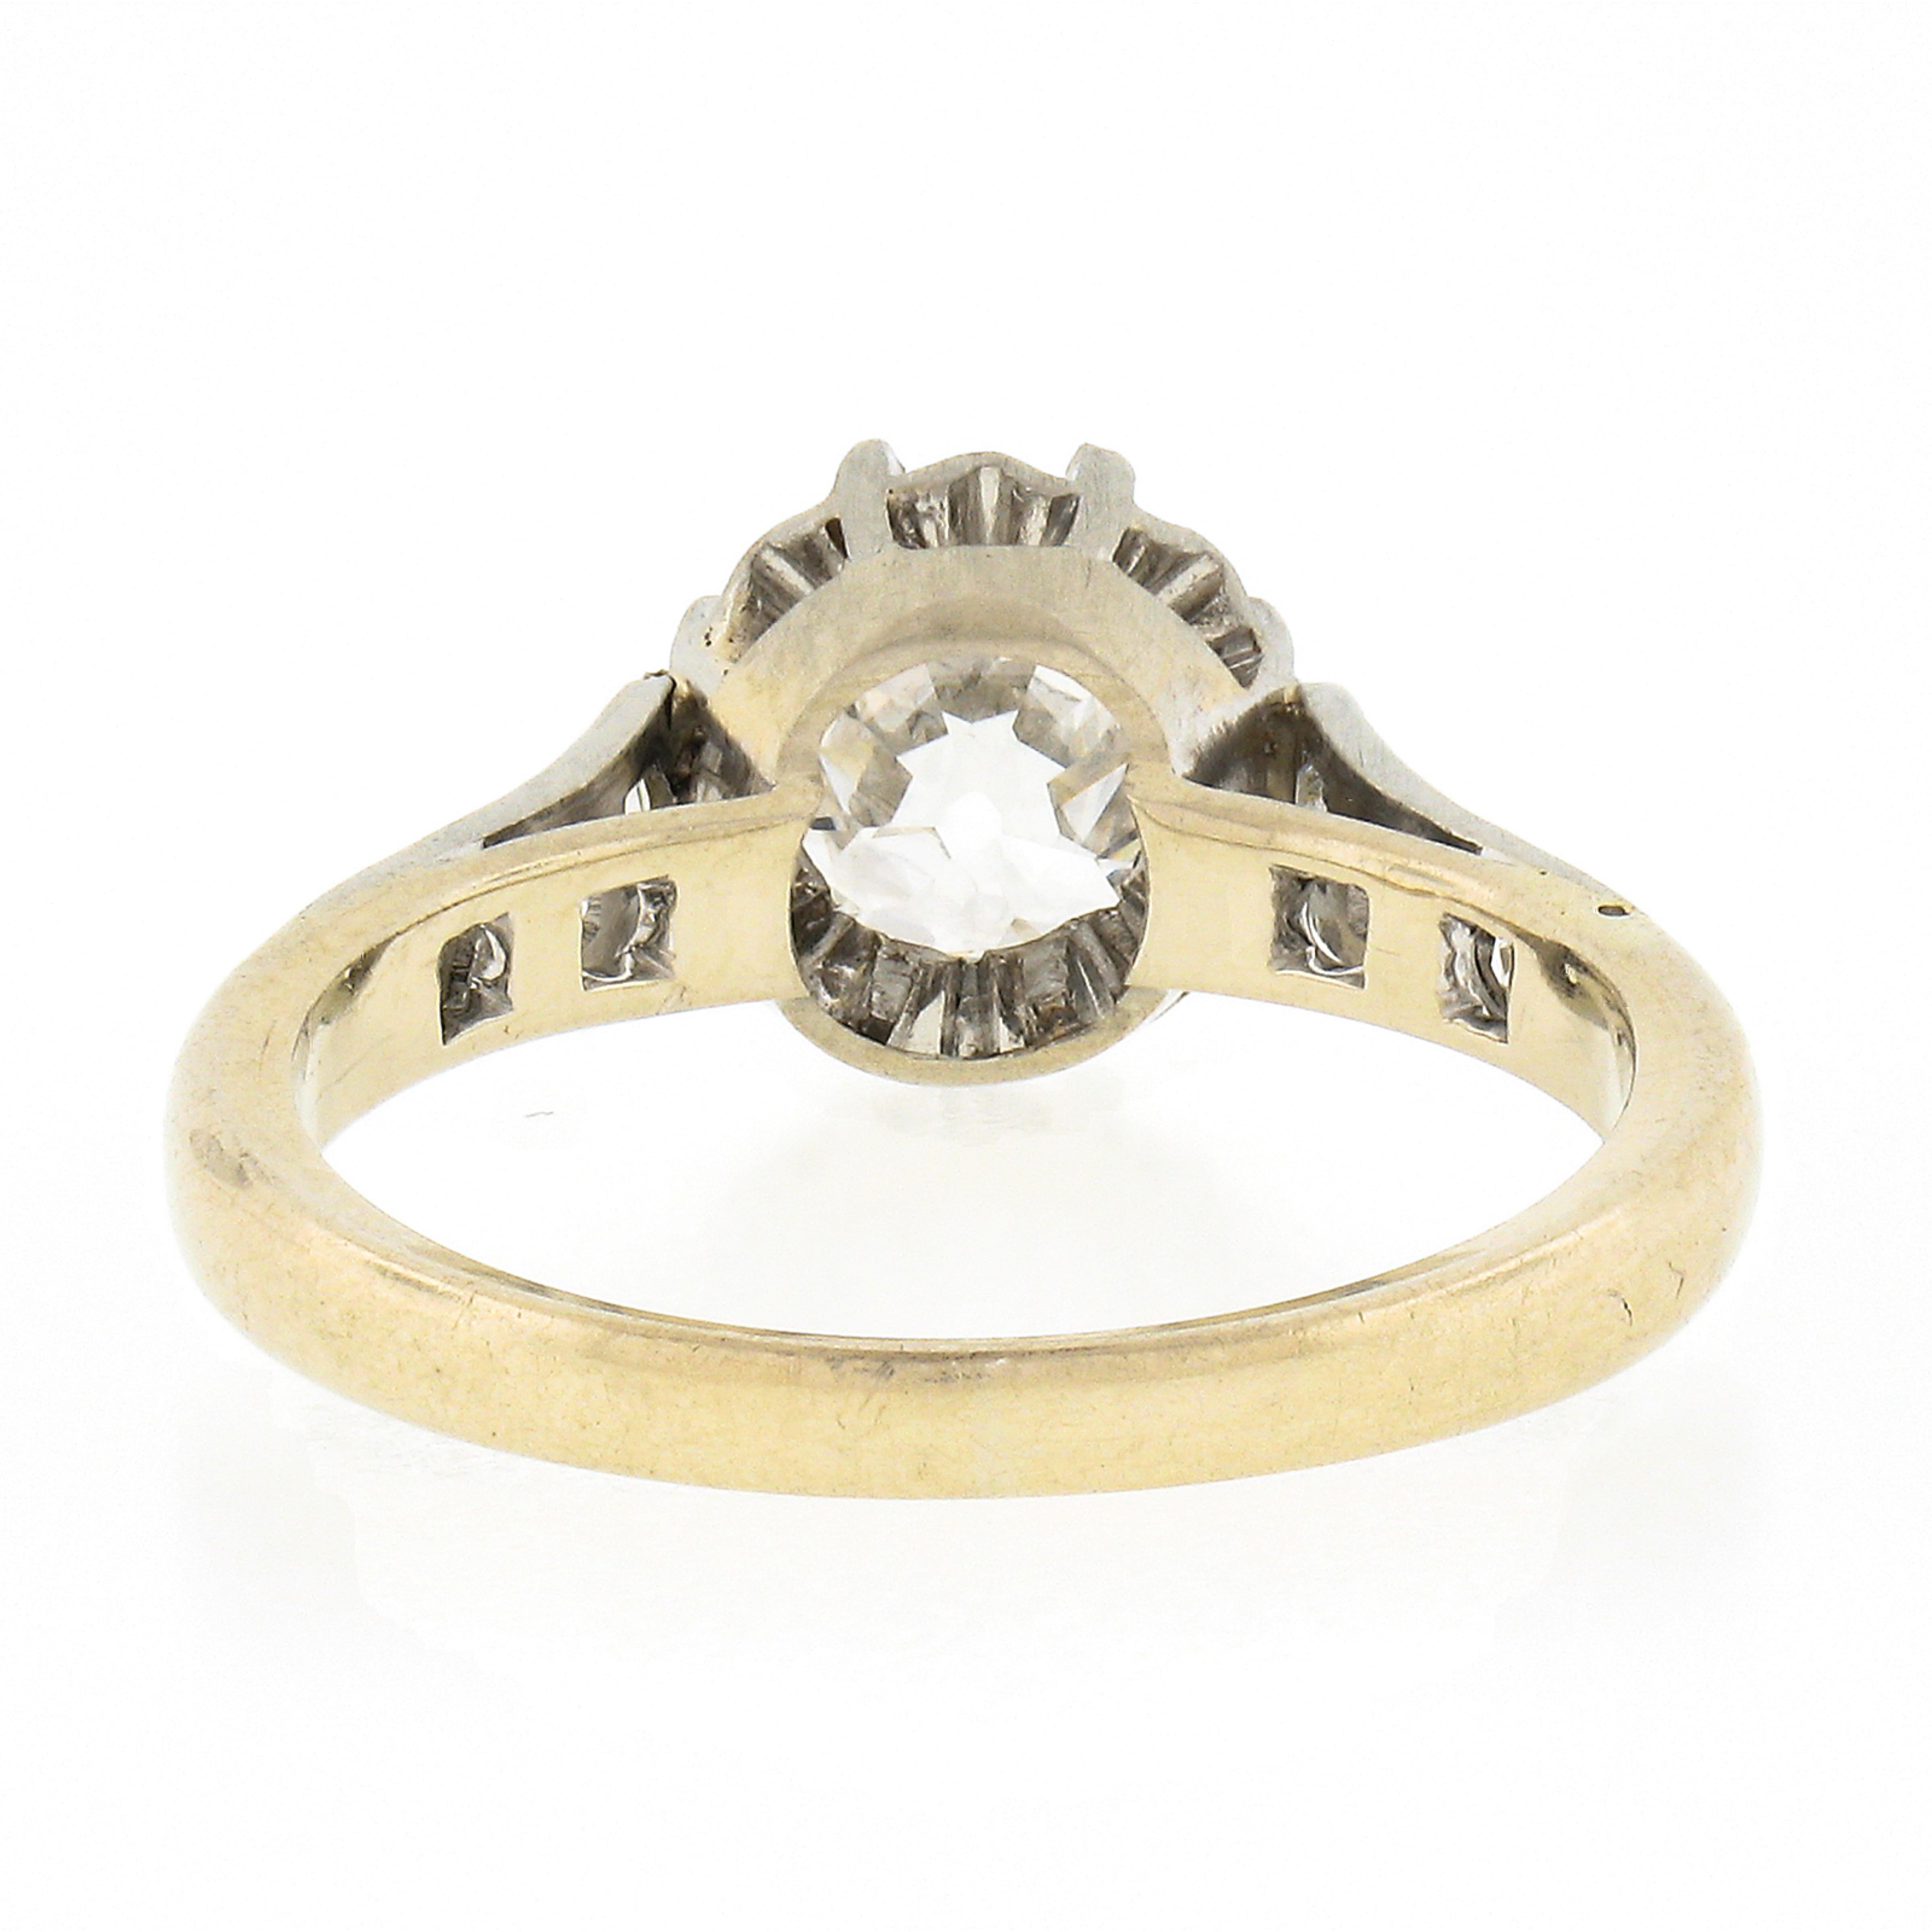 Antique Edwardian French Plat 18k Gold 1.7ct GIA European Diamond Solitaire Ring For Sale 2